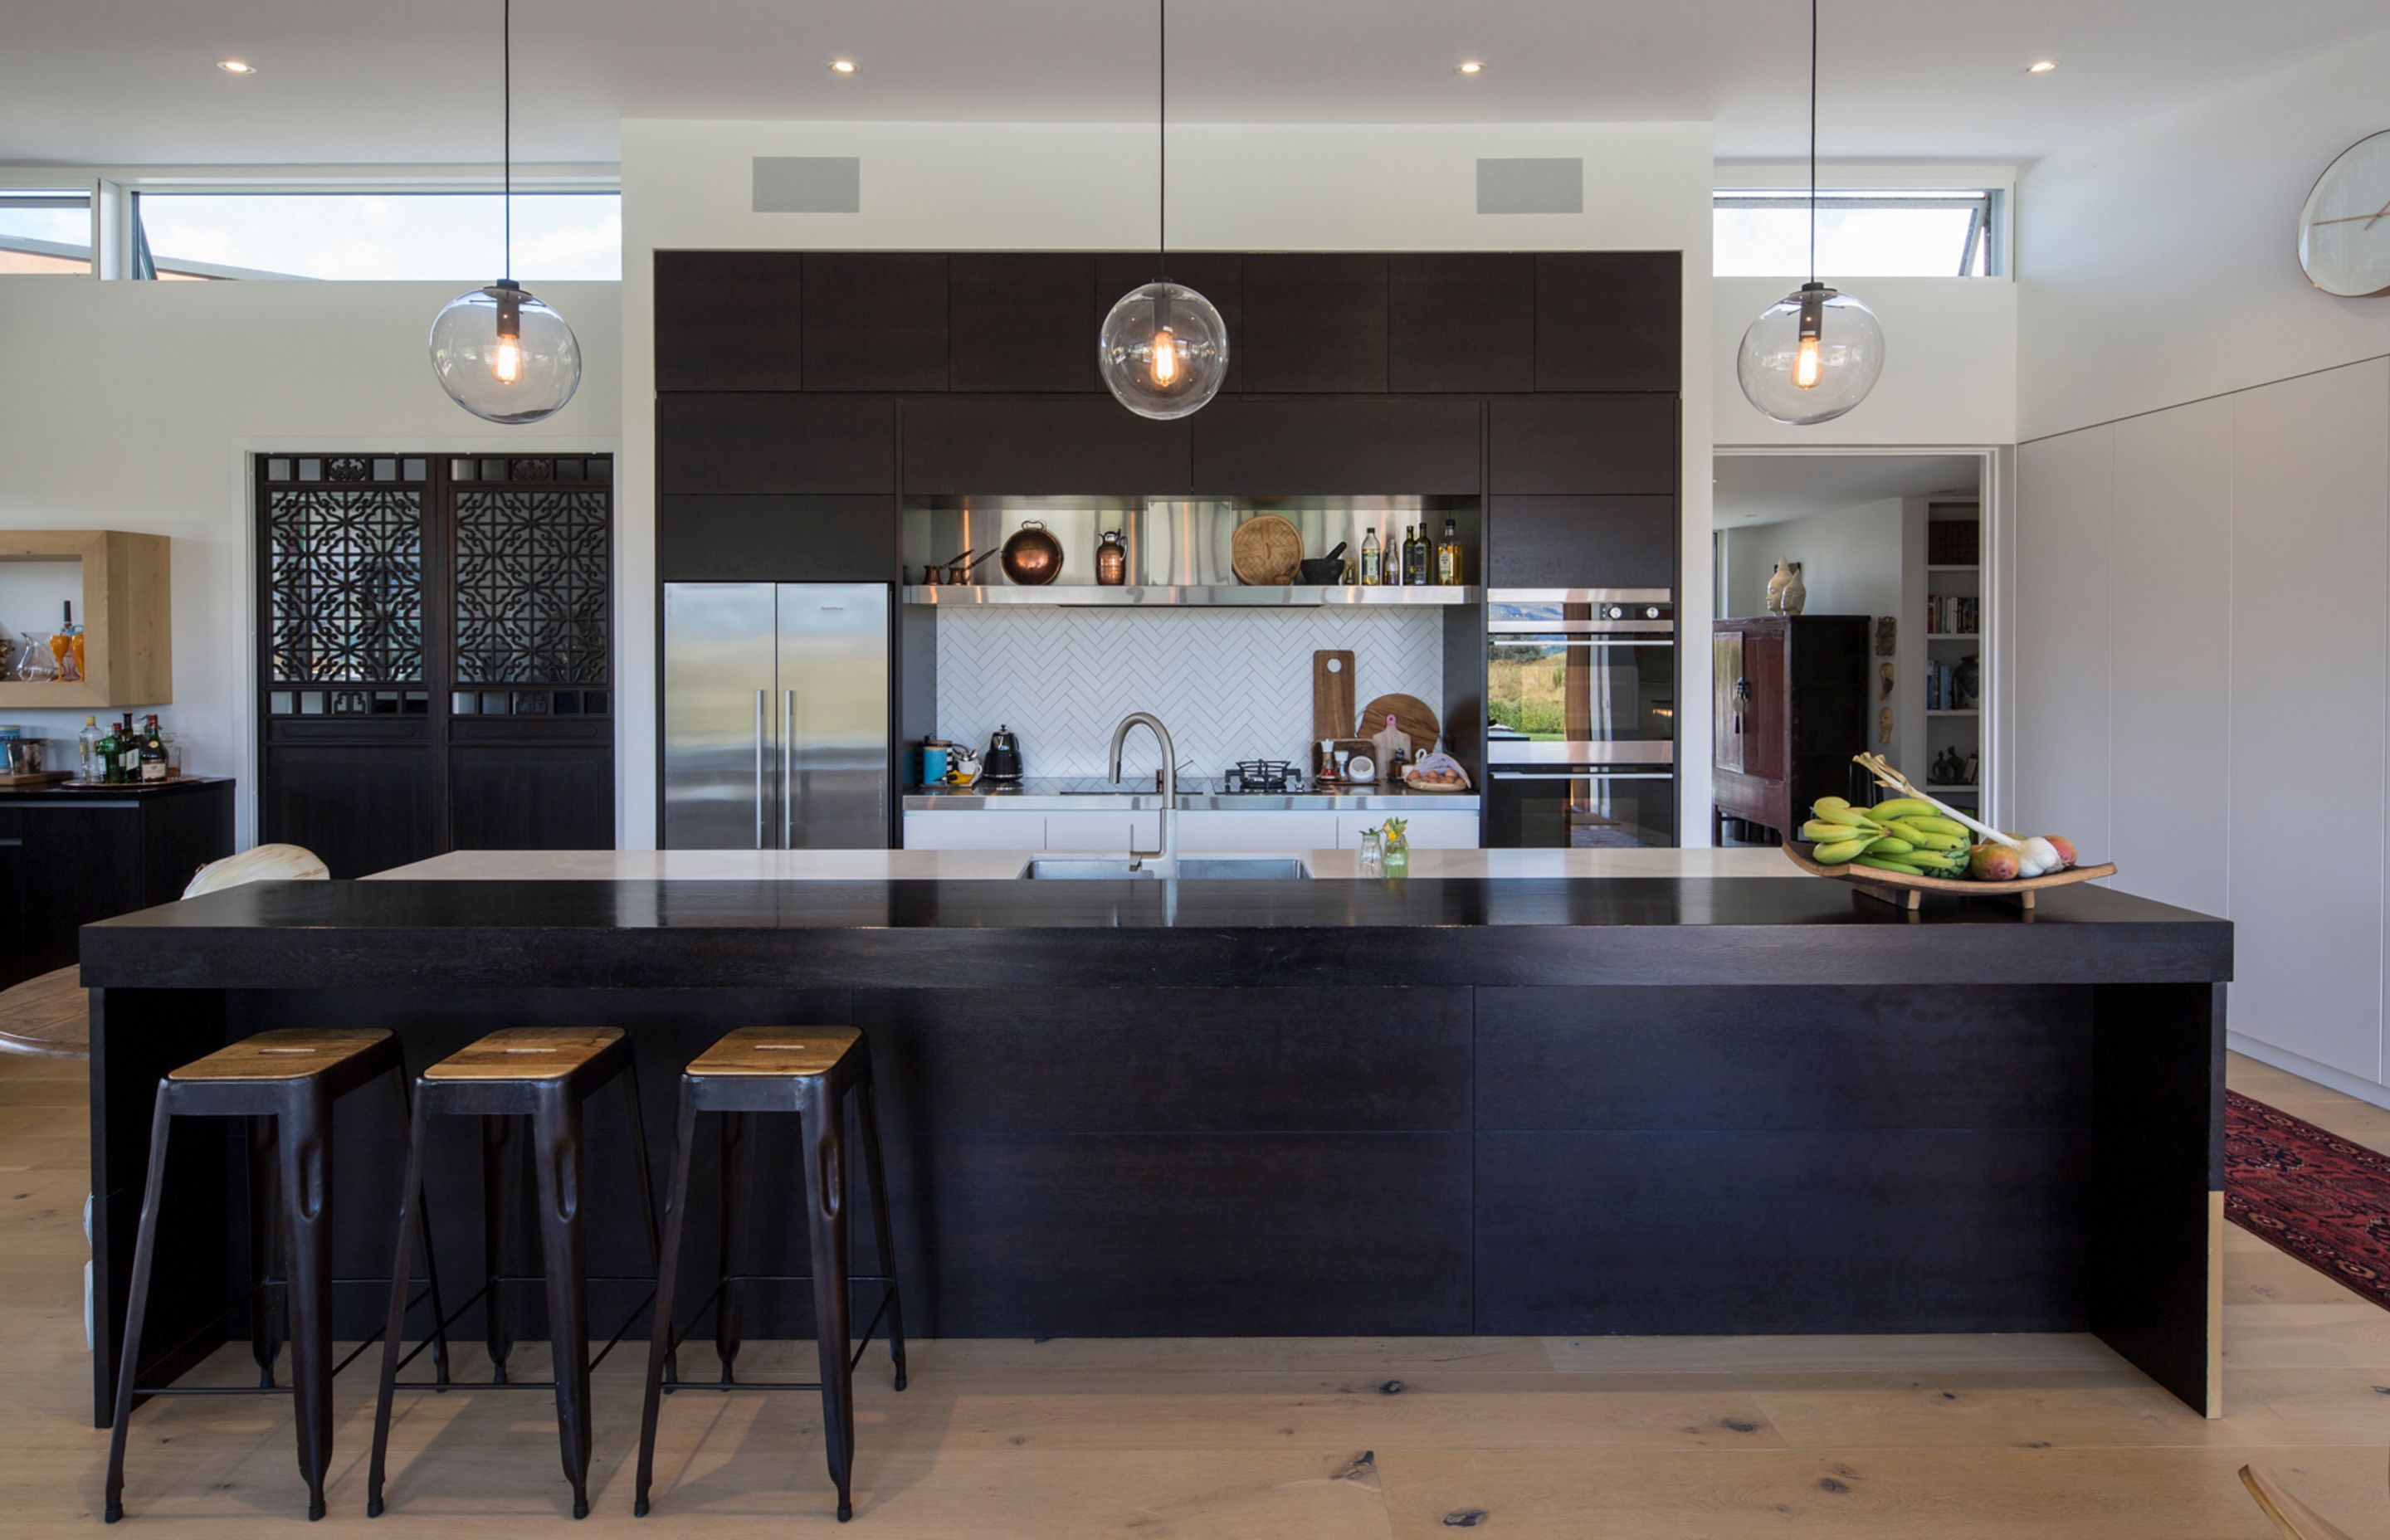 Set up to entertain, the galley-style kitchen features a large island bench with raised seating area. The dark stained timber cabinetry contrasts the neutral palette, while statement doors add a touch of texture.